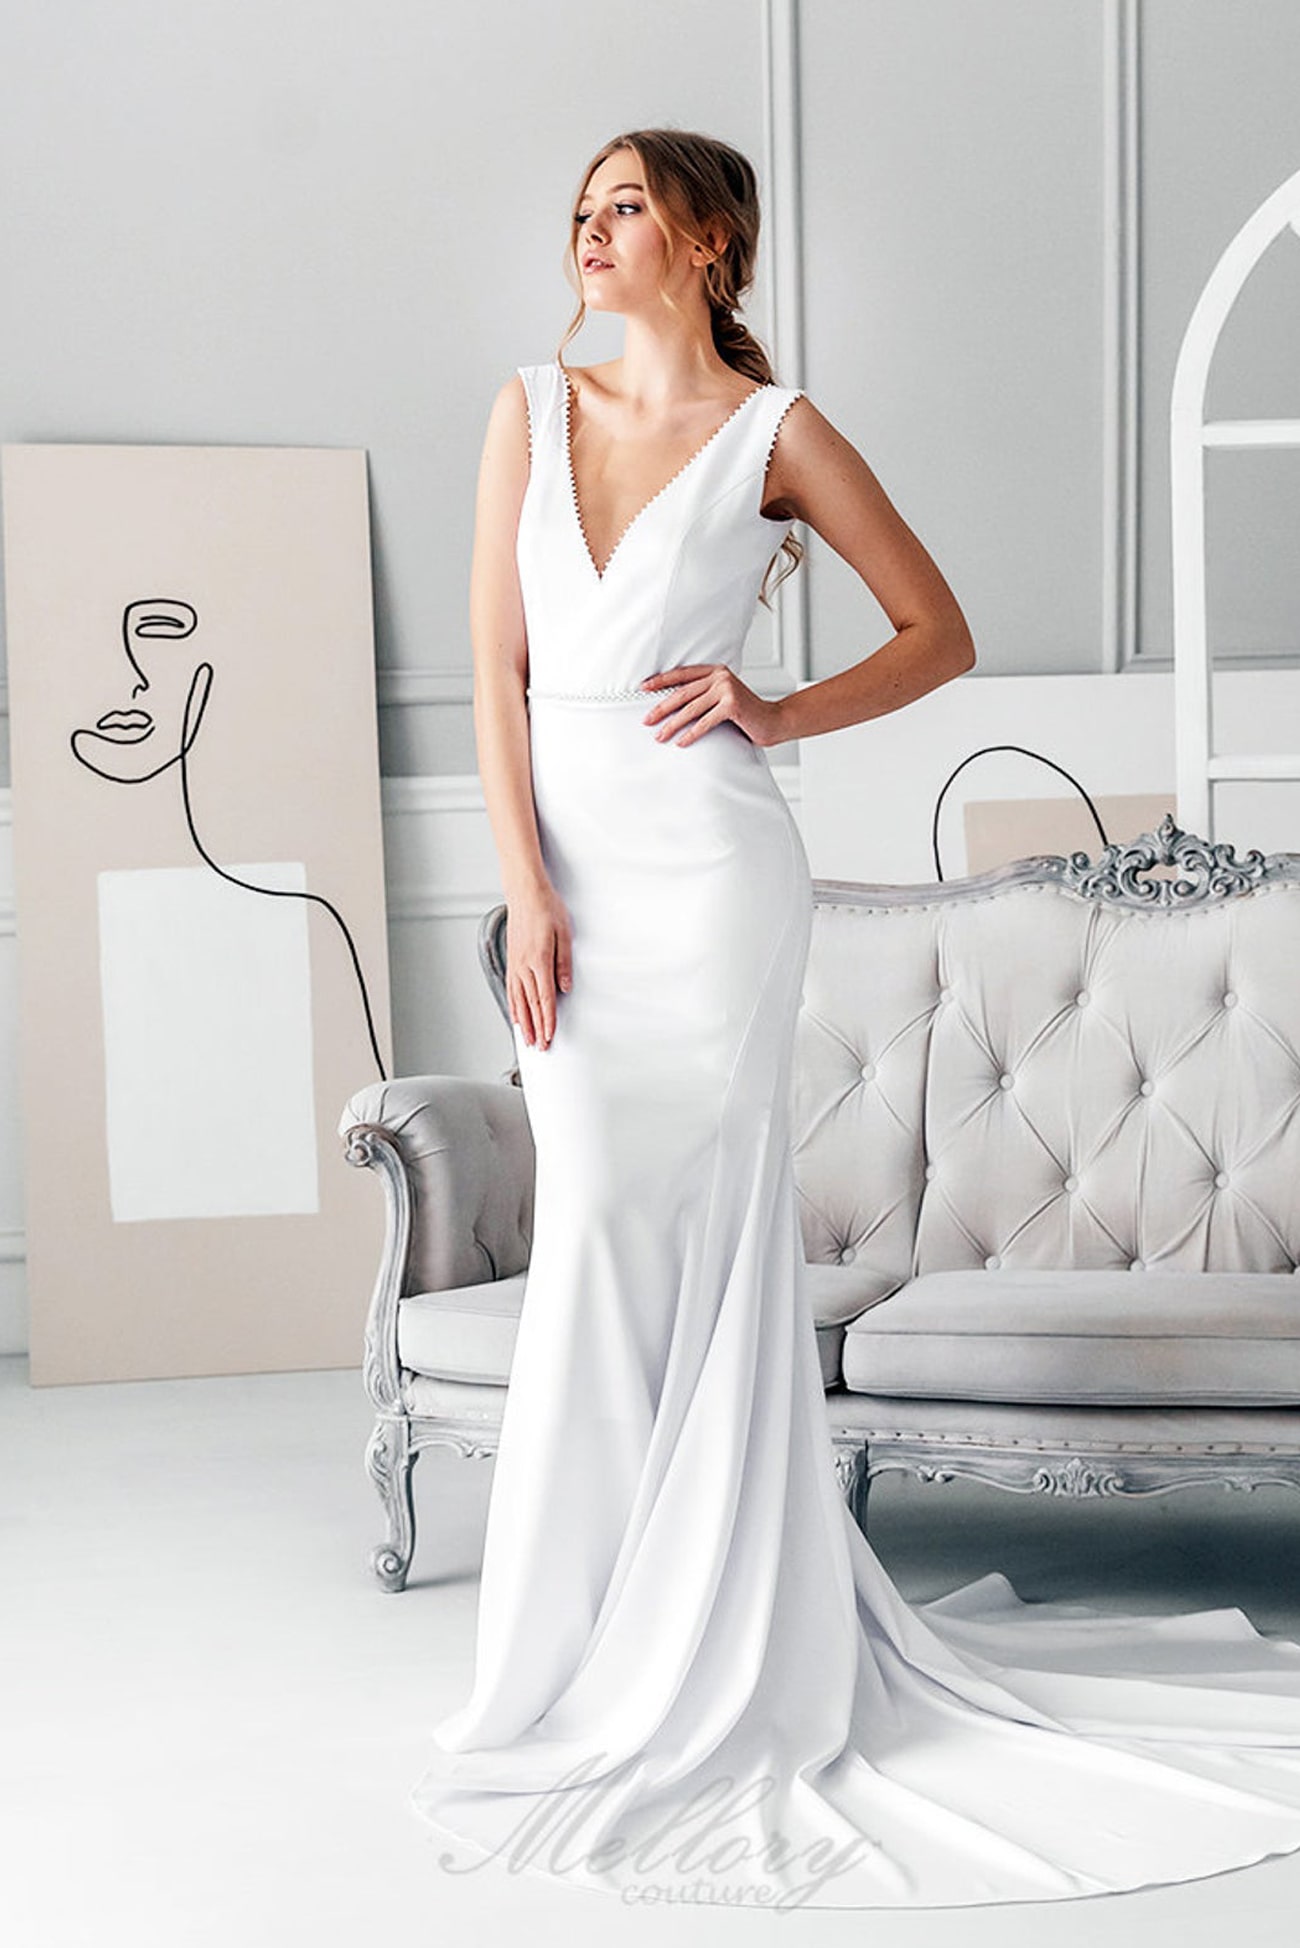 Best Wedding Dress Styles for Inverted Triangle Body Shape